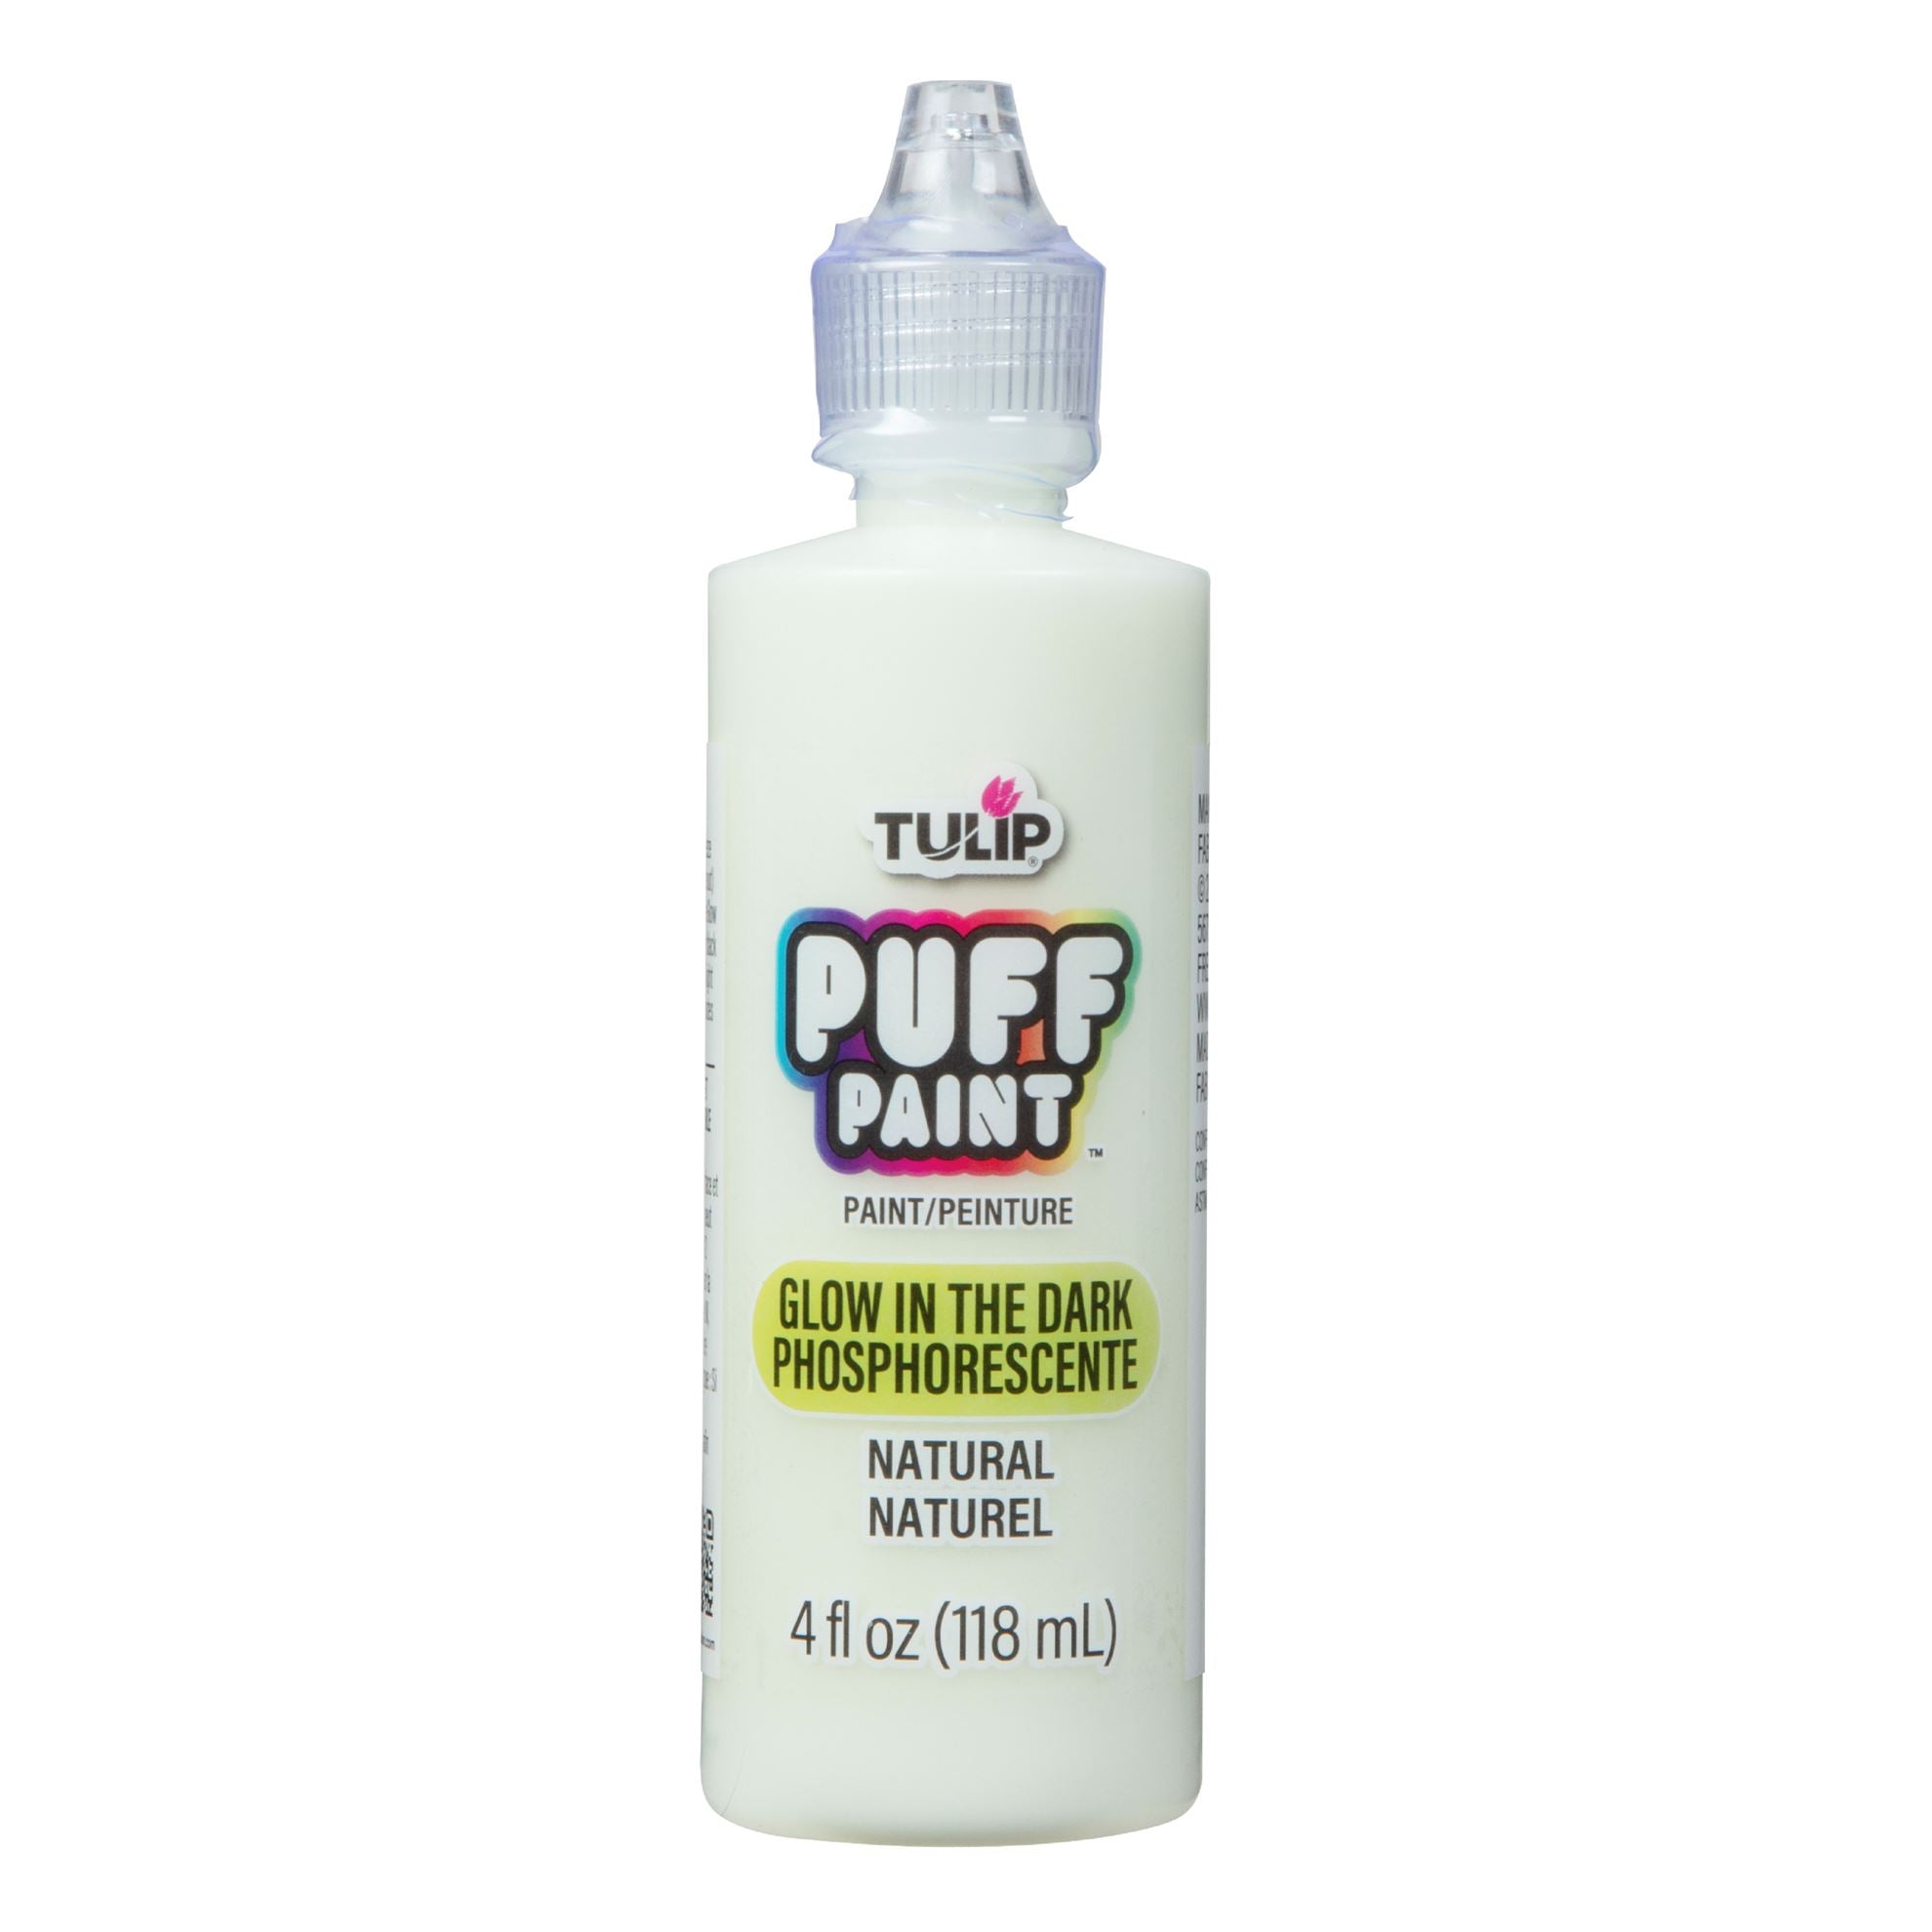 Tulip Dimensional Fabric Paint - White, Puffy, 1 oz